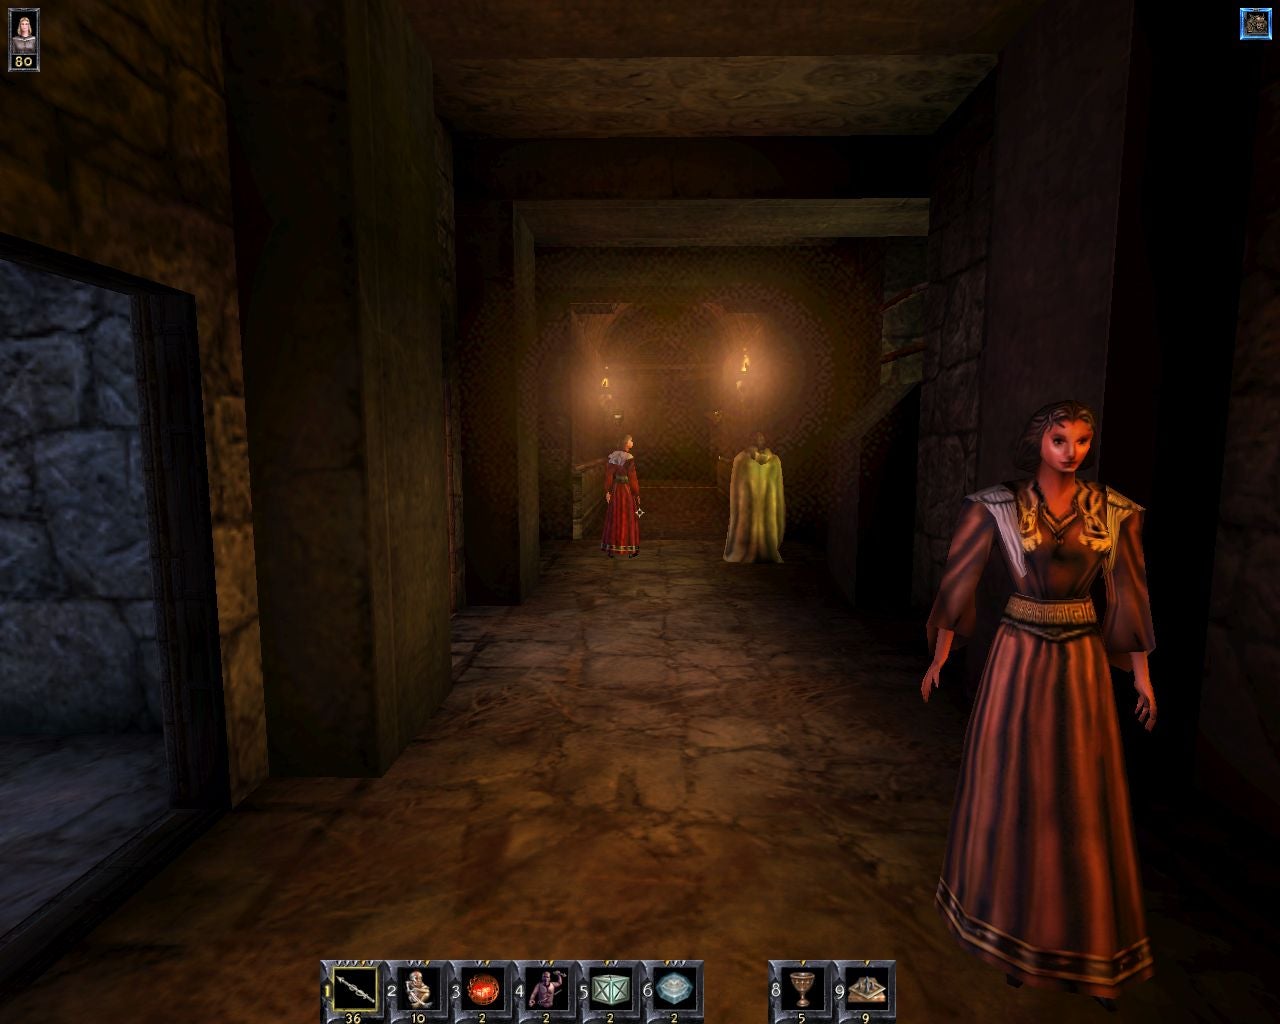 Robed people in a corridor in a The Wheel of Time screenshot.